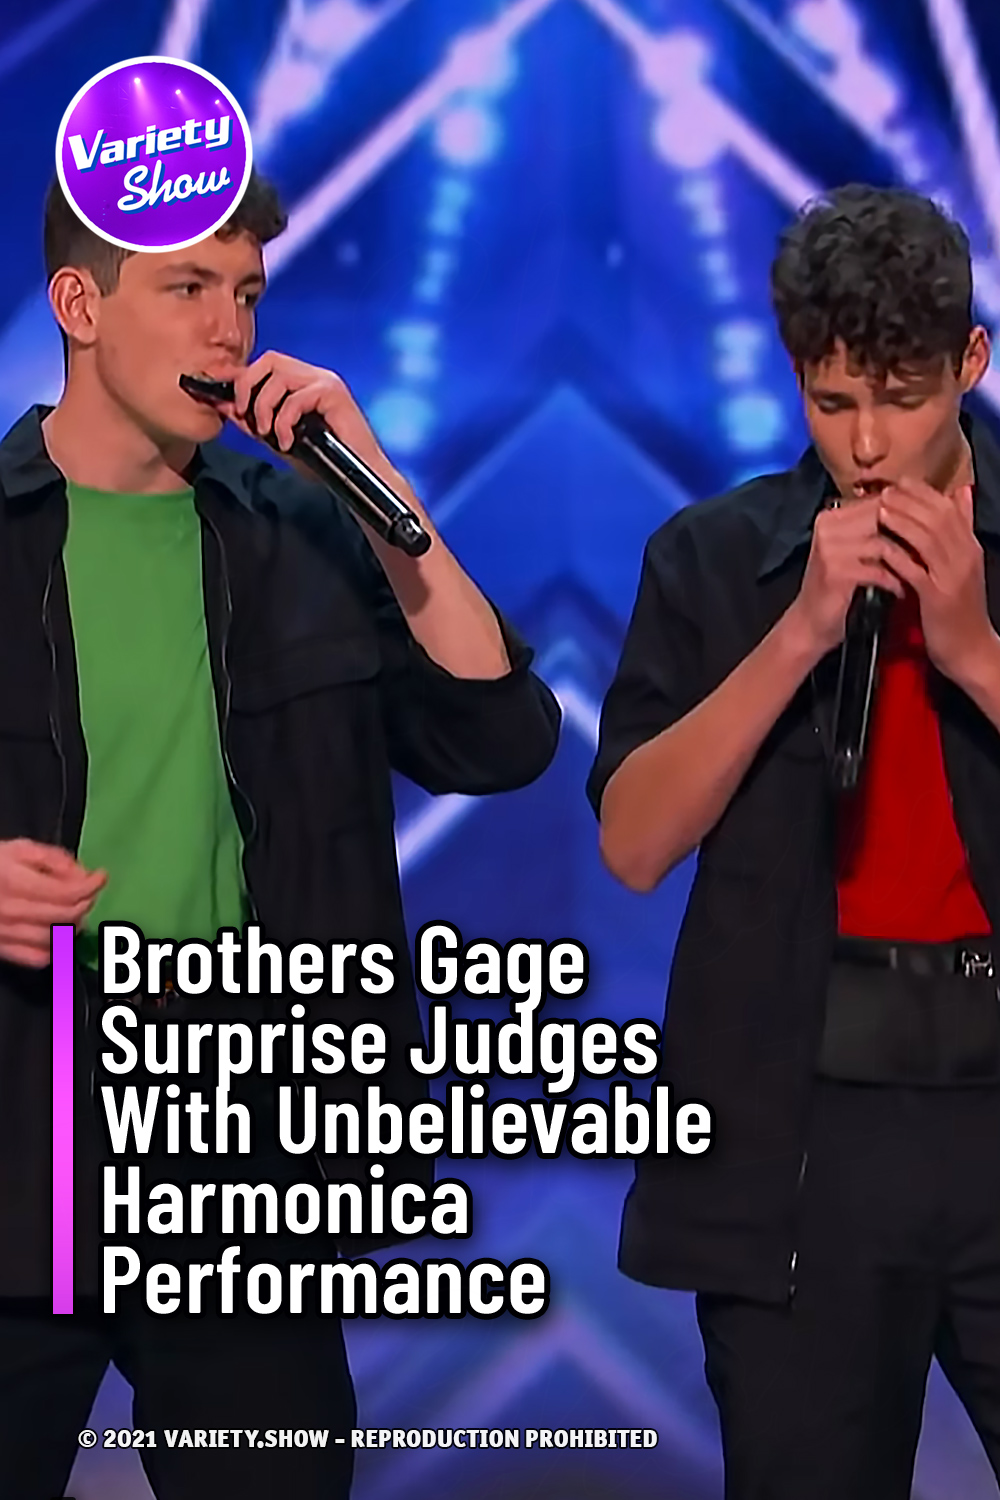 Brothers Gage Surprise Judges With Unbelievable Harmonica Performance